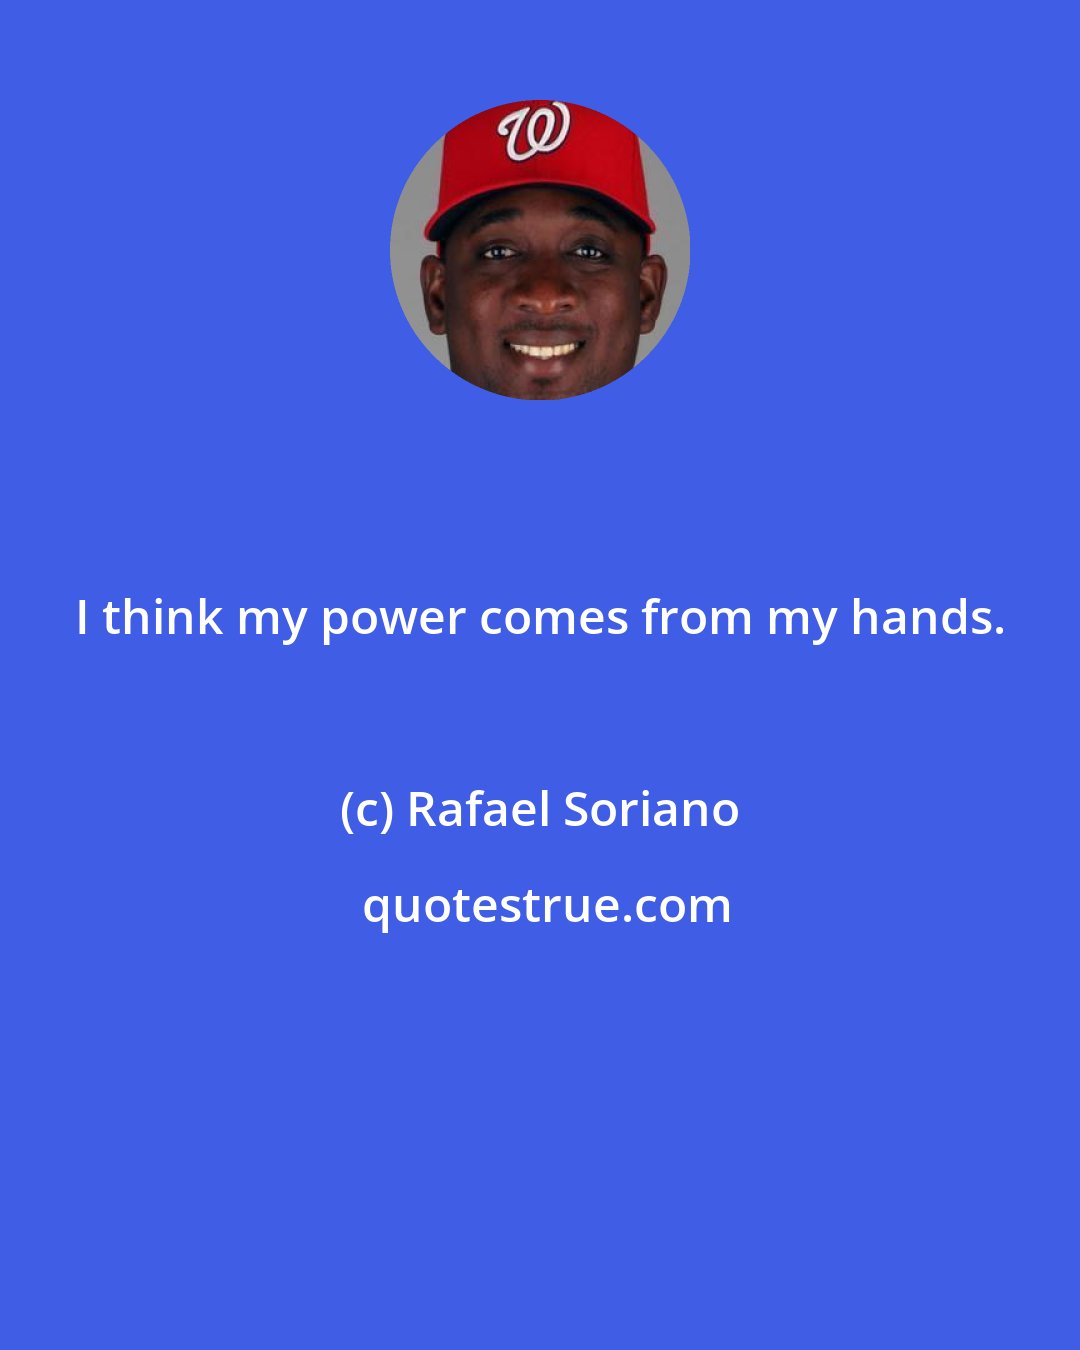 Rafael Soriano: I think my power comes from my hands.